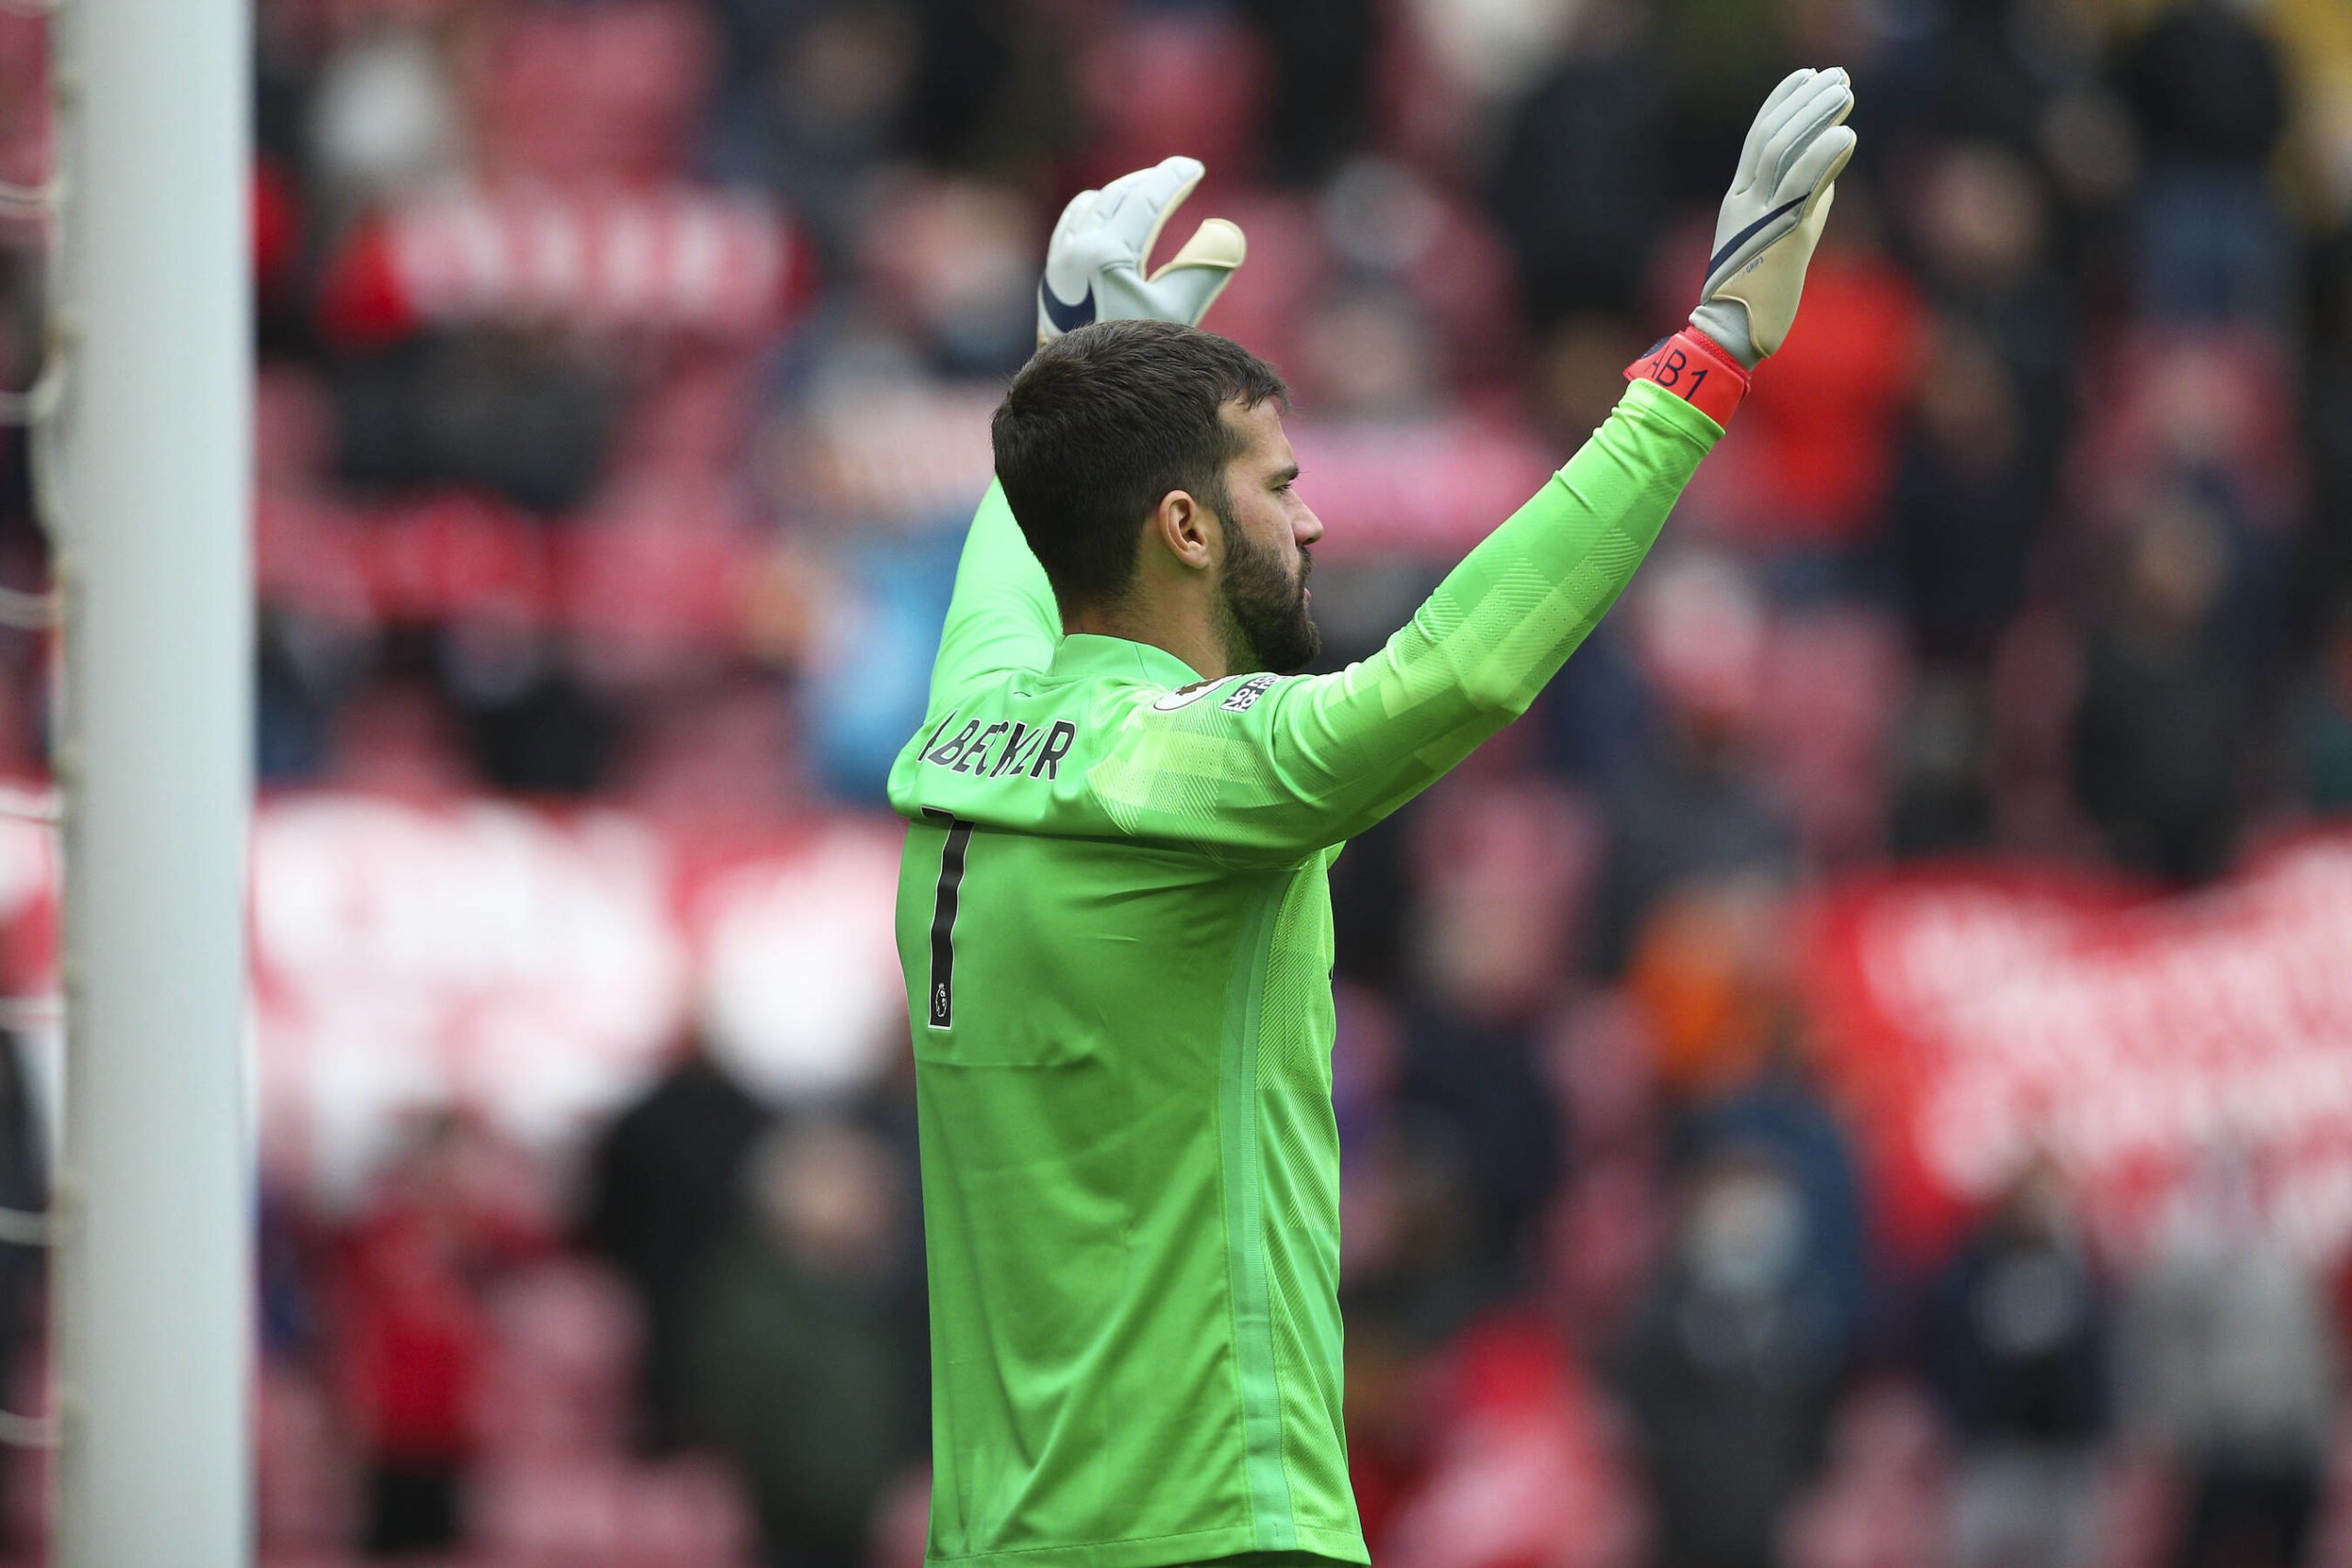 Liverpool's Alisson pens new long-term contract (Alisson is seen in the photo)